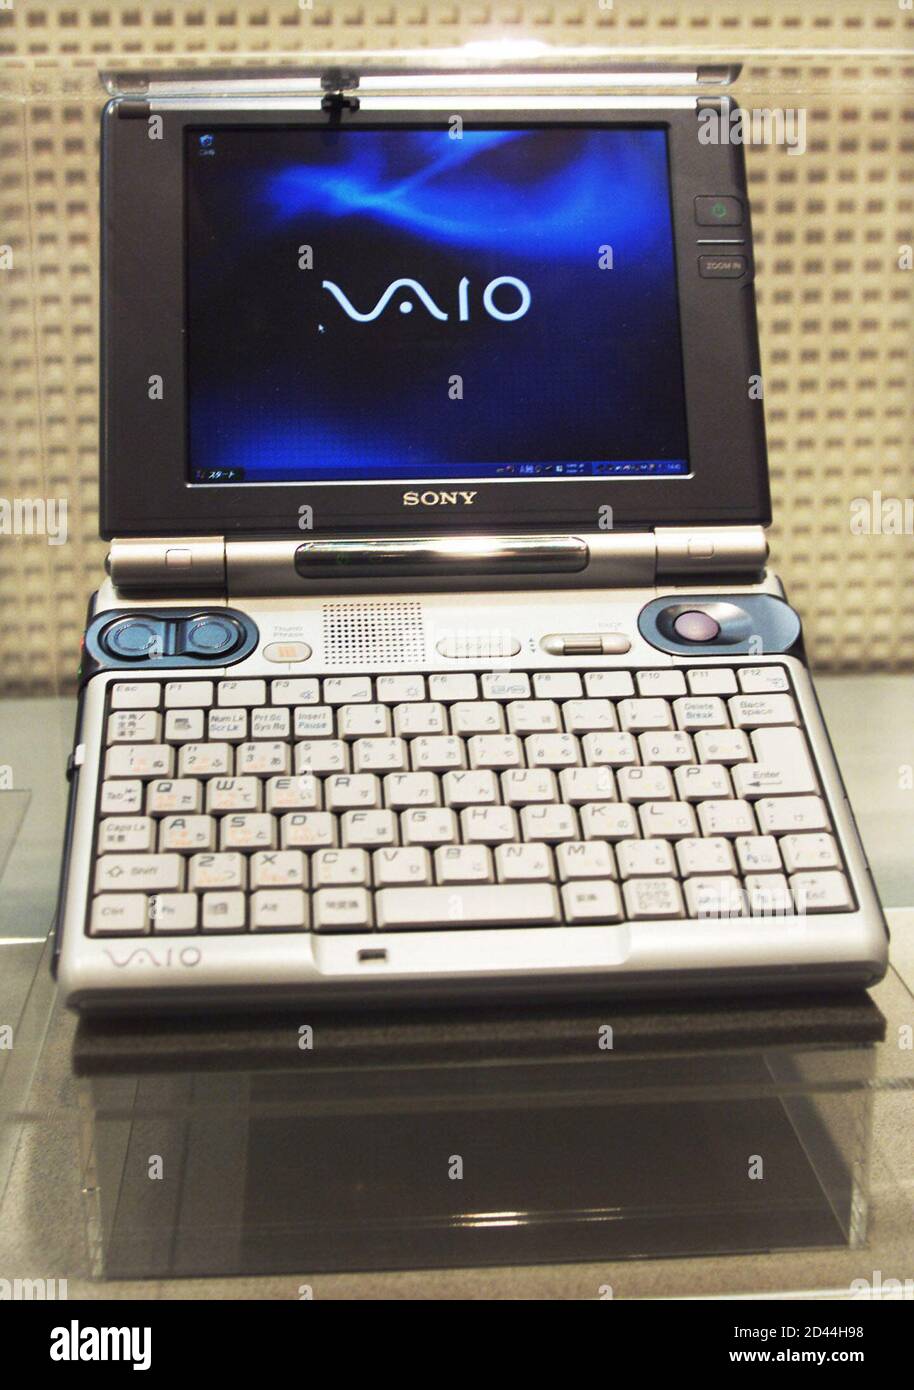 Sony Vaio Japan High Resolution Stock Photography And Images Alamy